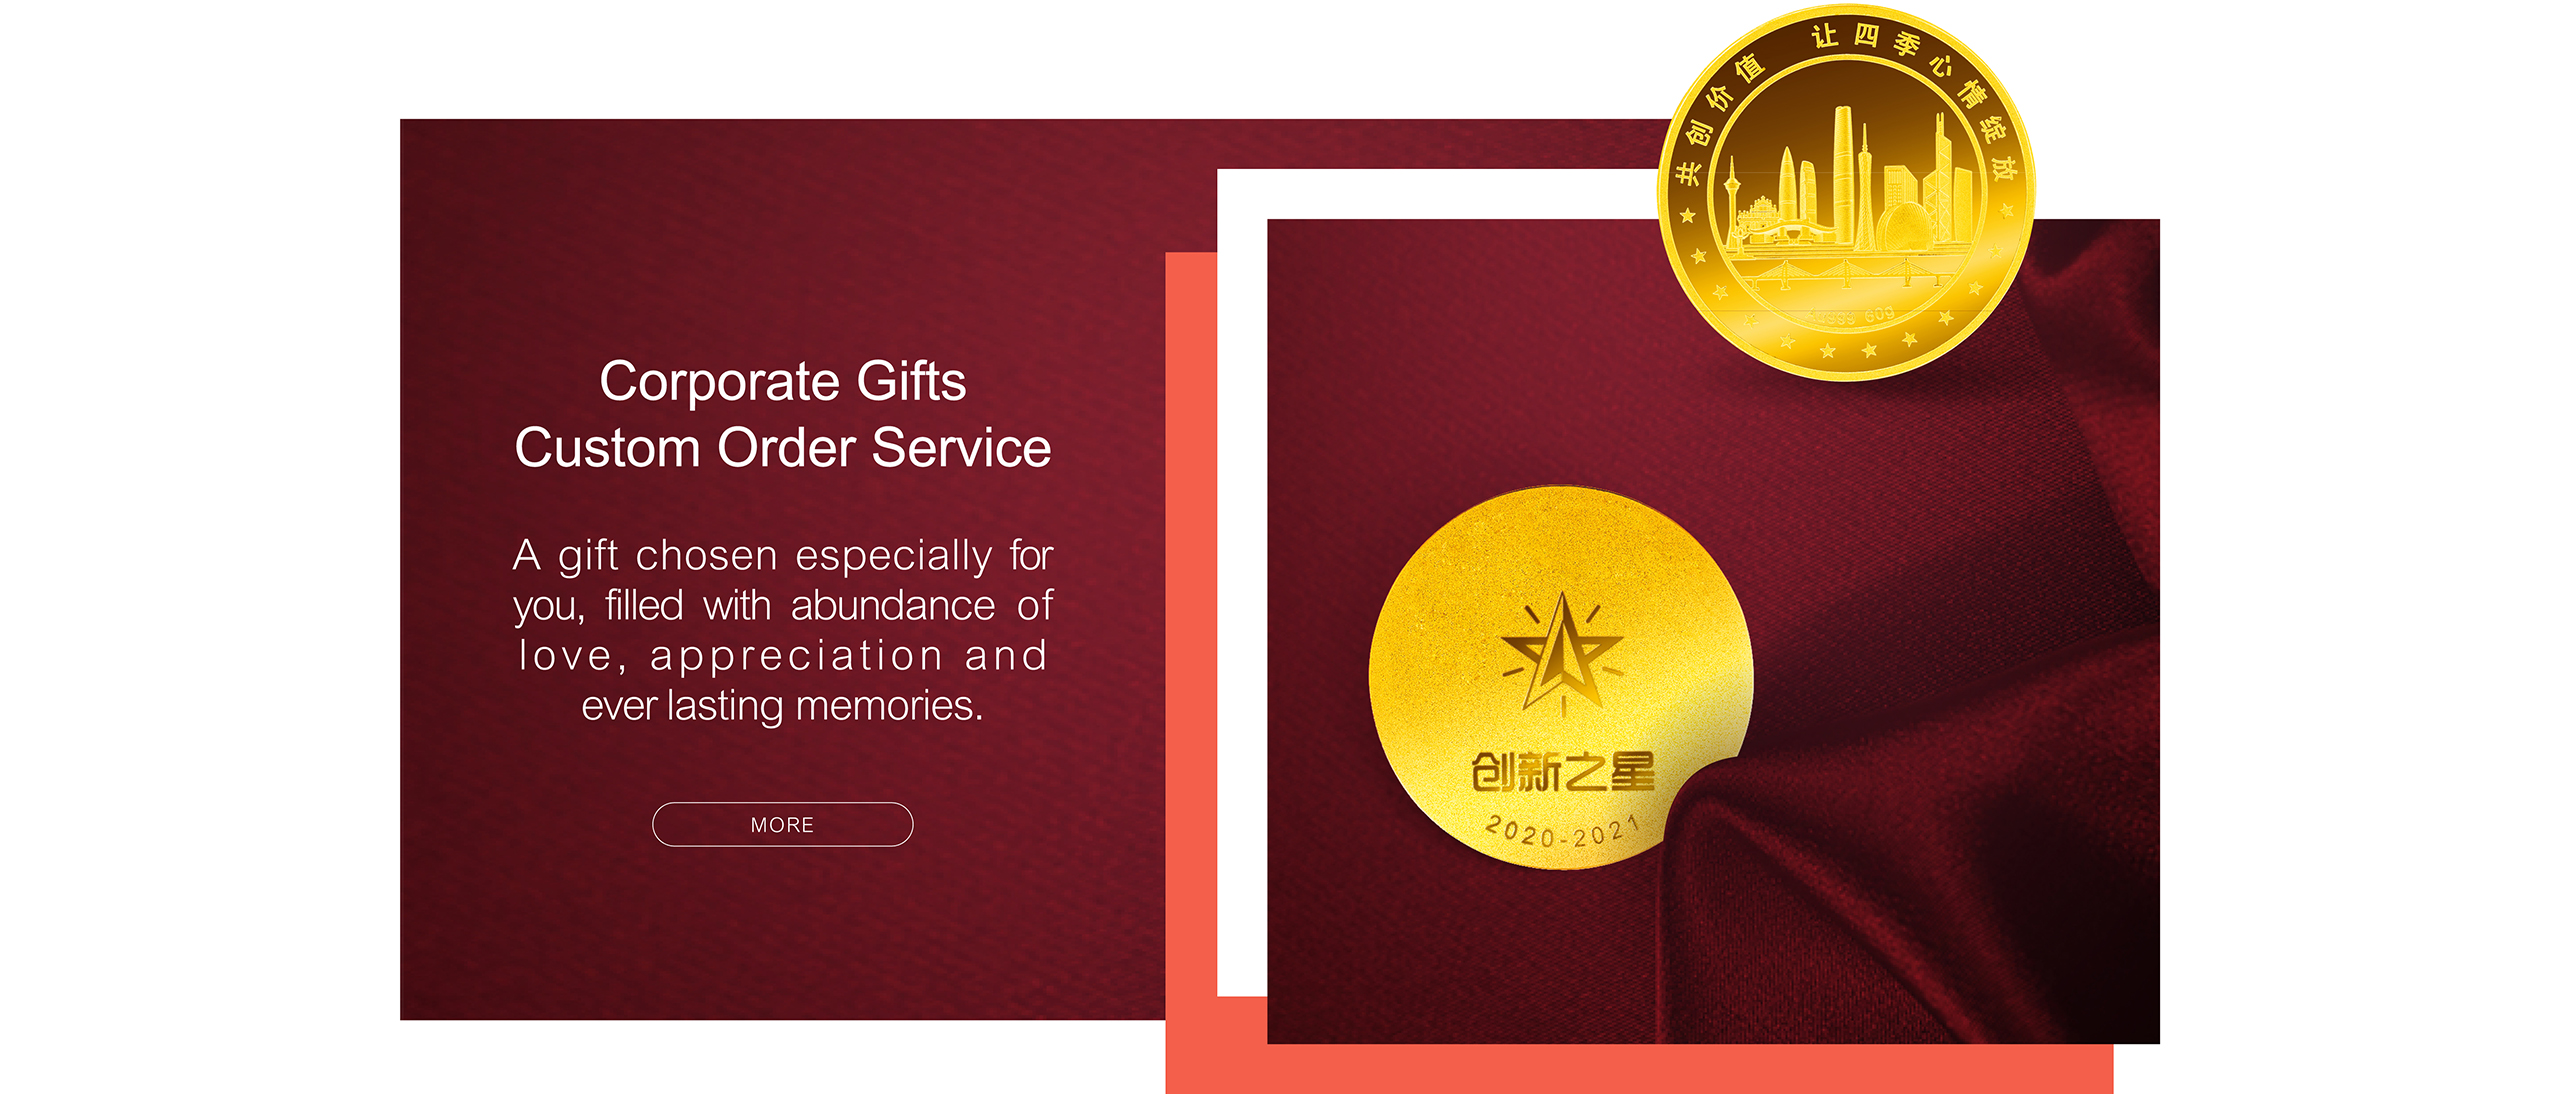 Corporate Gifts | Gold items